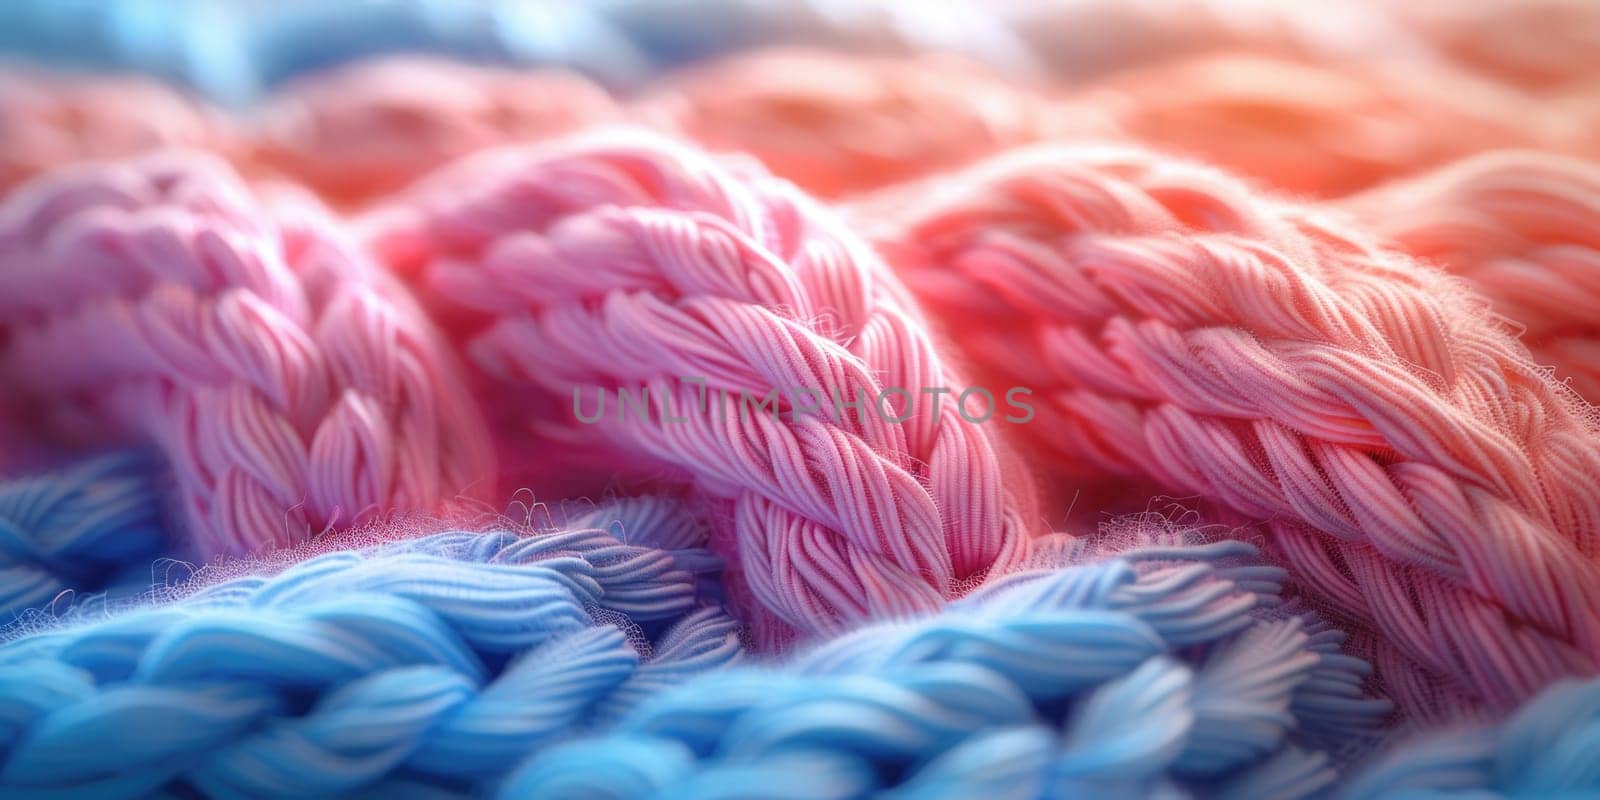 Detailed view of a rope with a blurred background, showcasing the textures and patterns of the fibers.